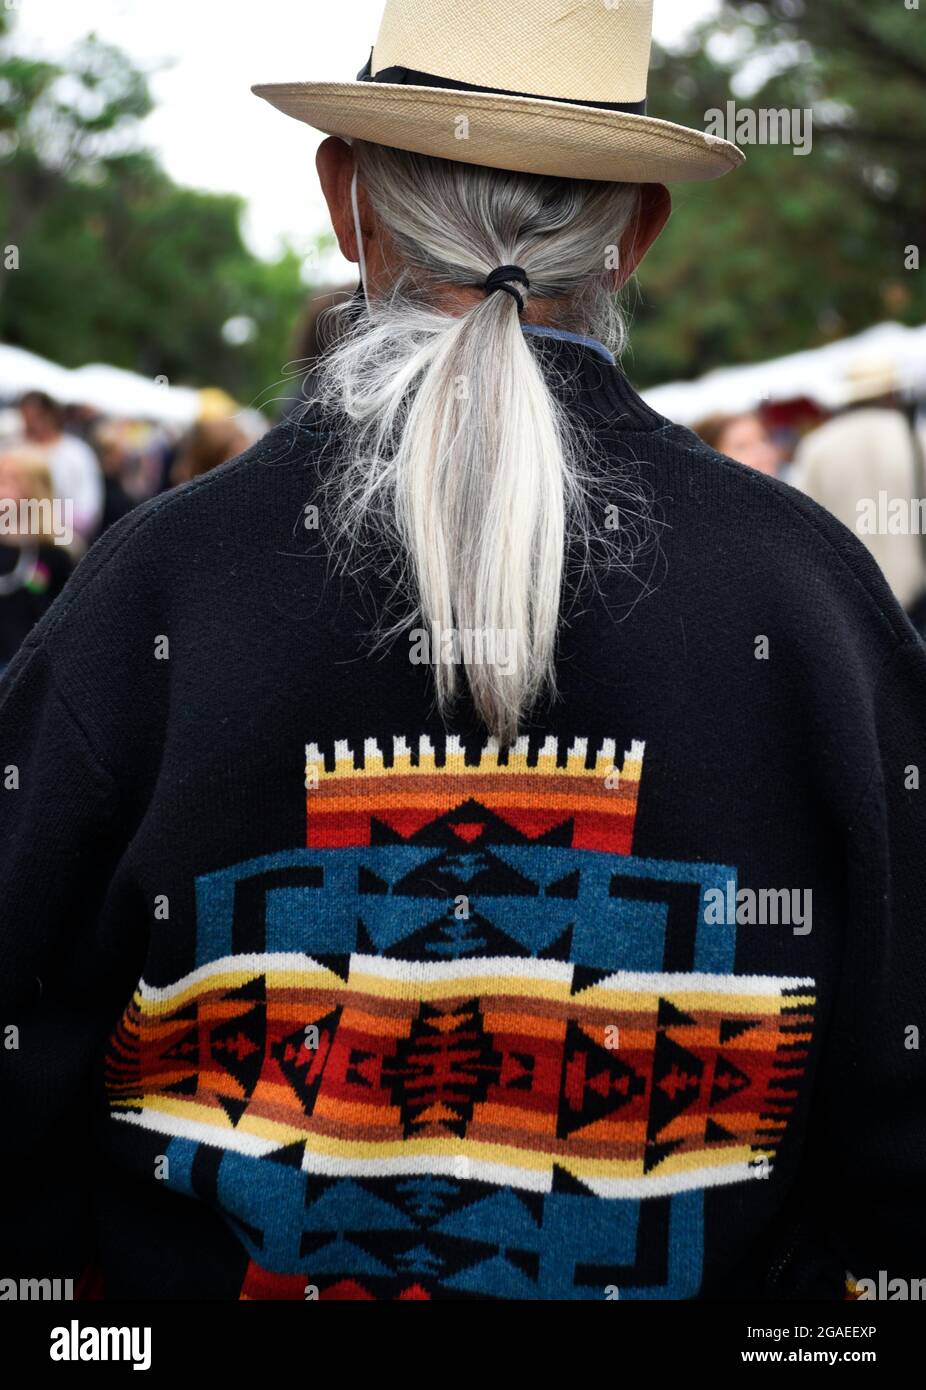 A senior man with lone gray and white hair enjoys an outdoor art festival in Santa Fe, New Mexico. Stock Photo